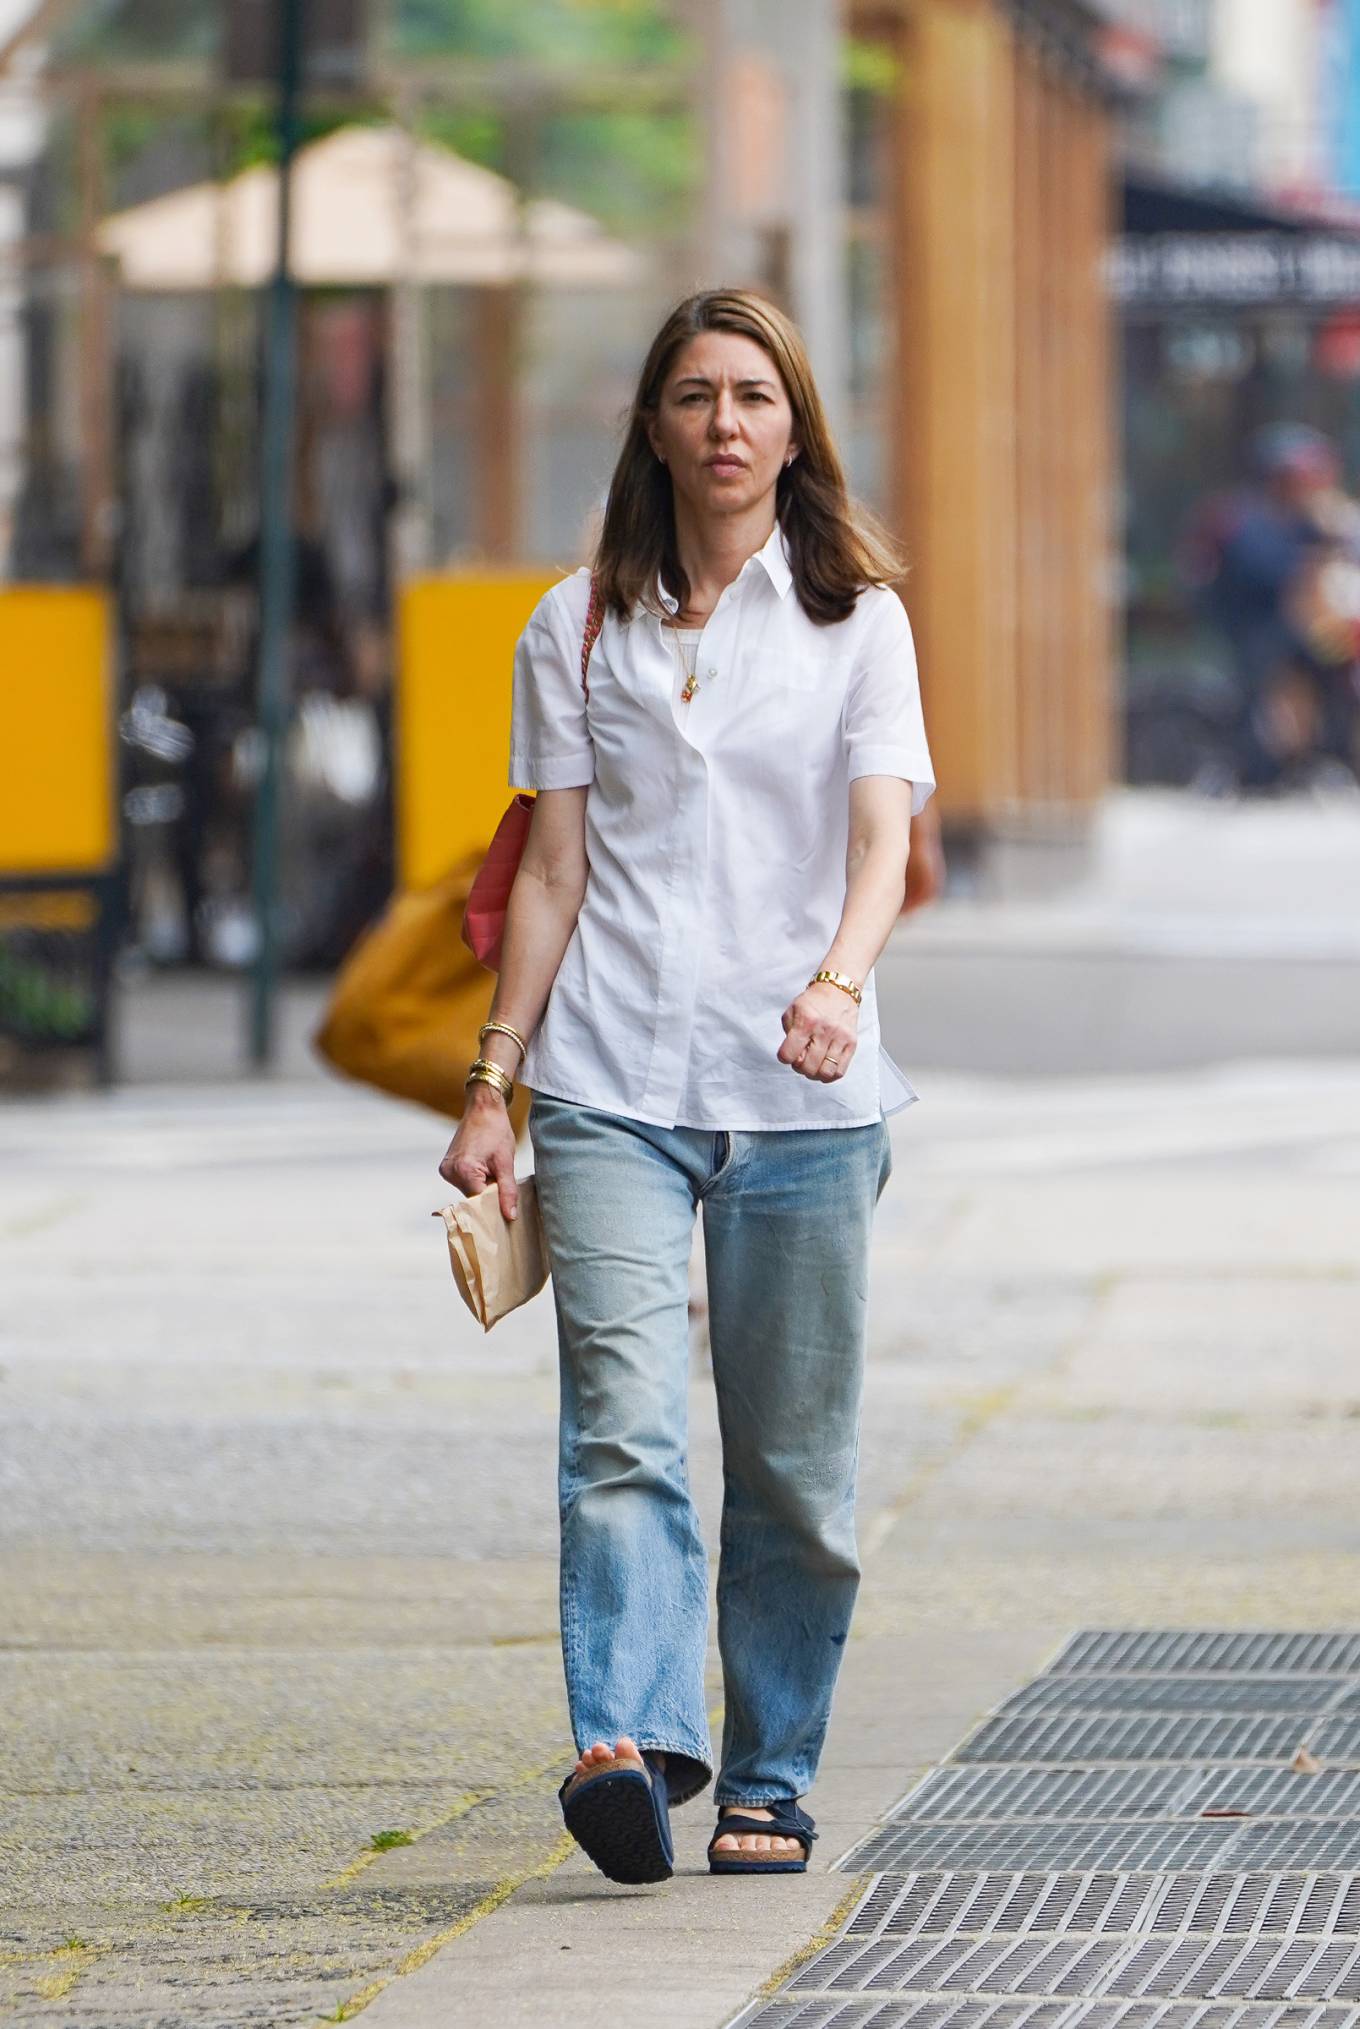 Sofia Coppola - Looks casual while out in New York